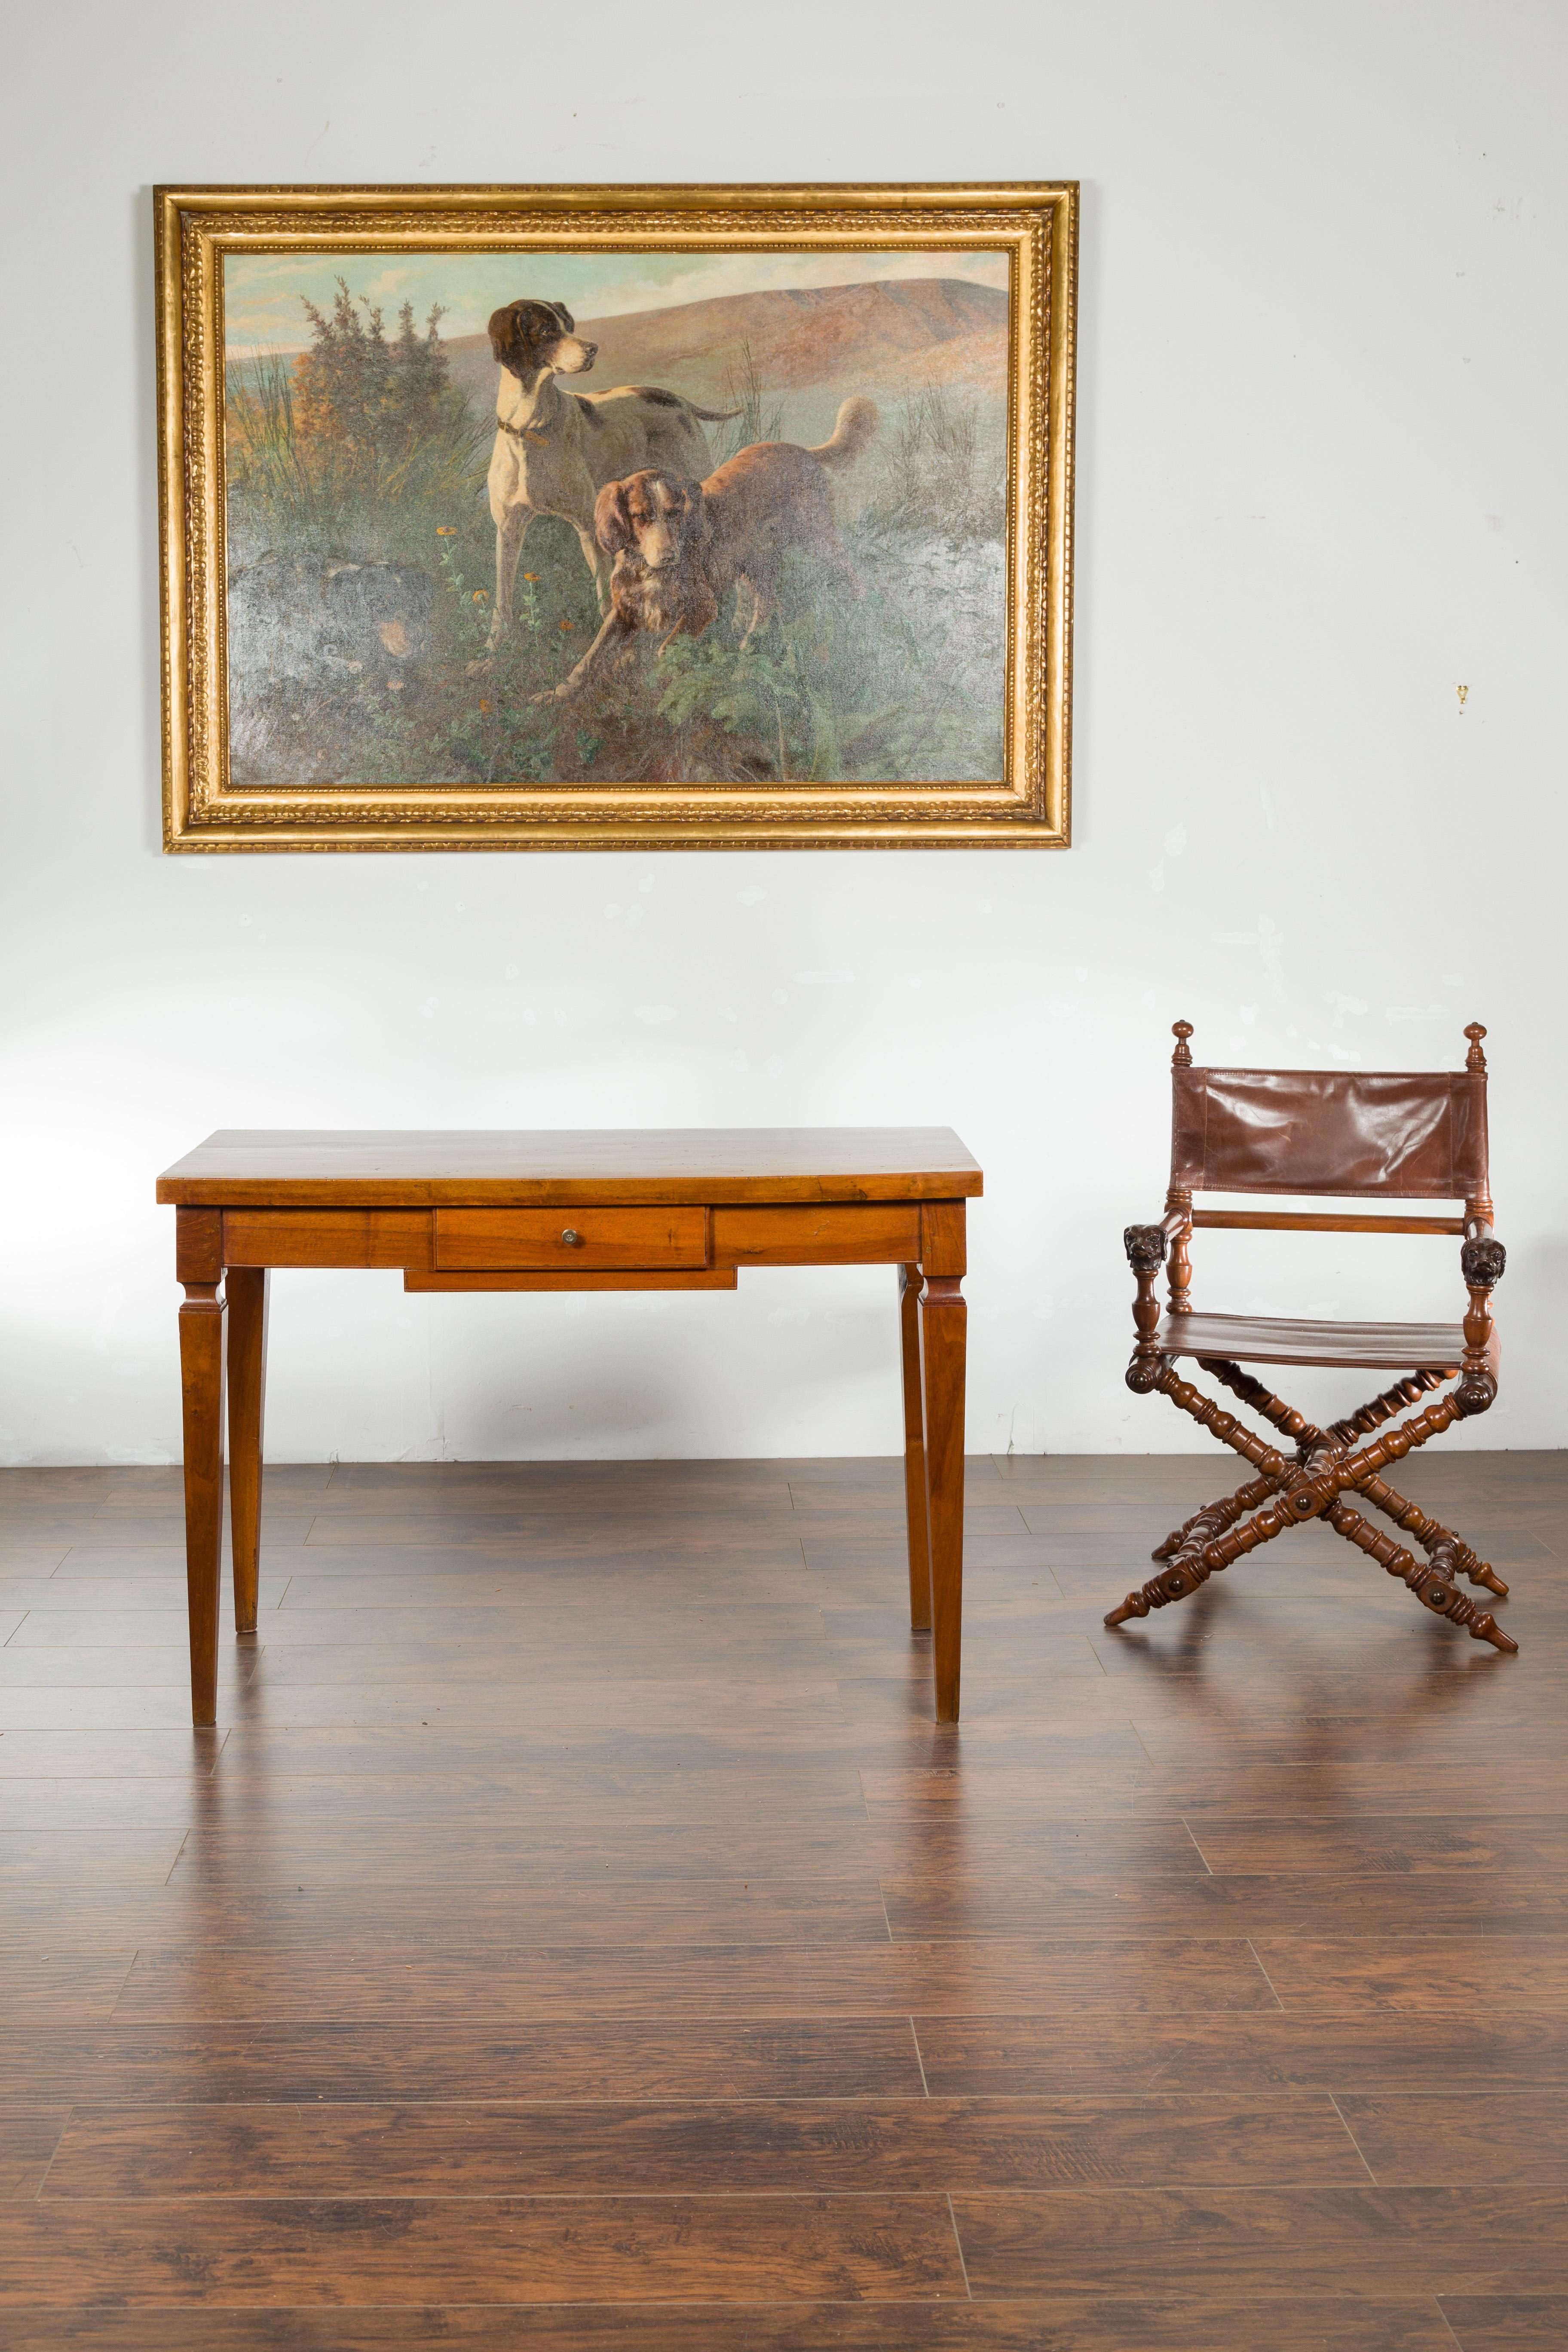 An Italian walnut desk from the 19th century, with single drawer and tapered legs. Created in Italy during the 19th century, this walnut desk features a rectangular single planked top sitting above a small drawer opening thanks to a brass pull.